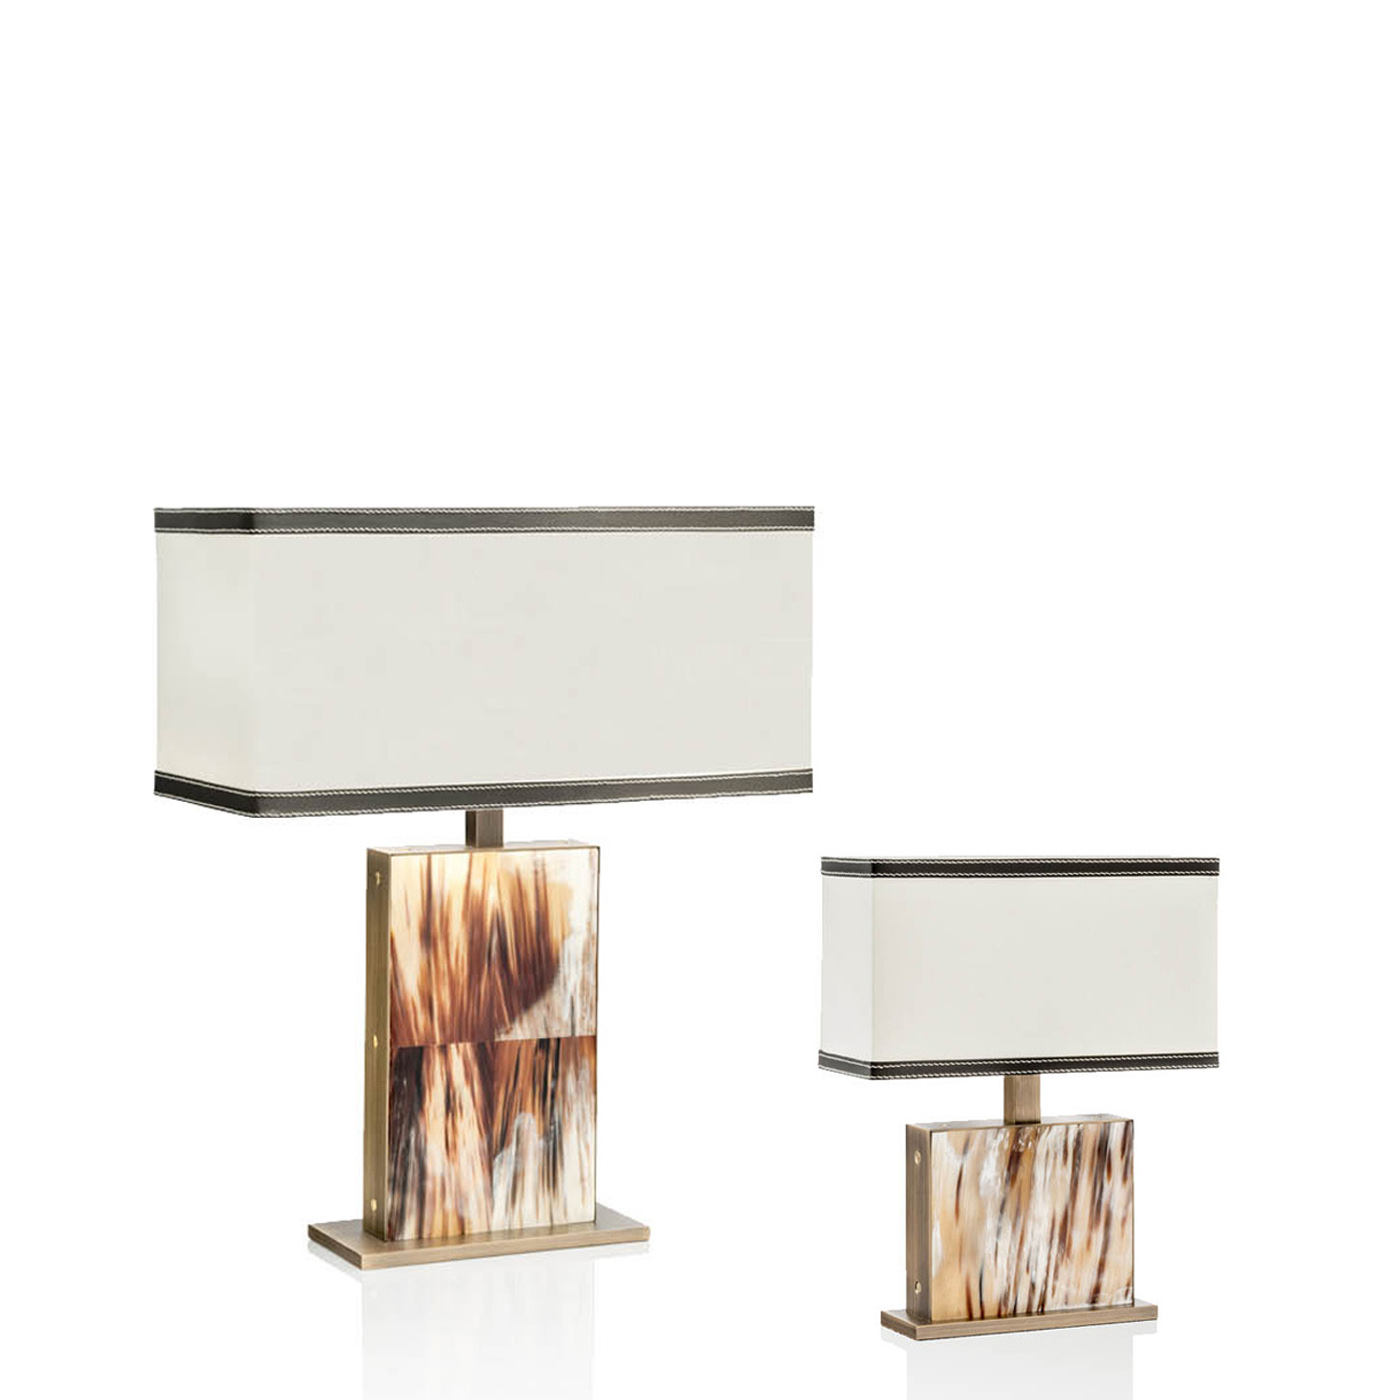 Lamps - Florian table lamps in horn and burnished brass - Arcahorn